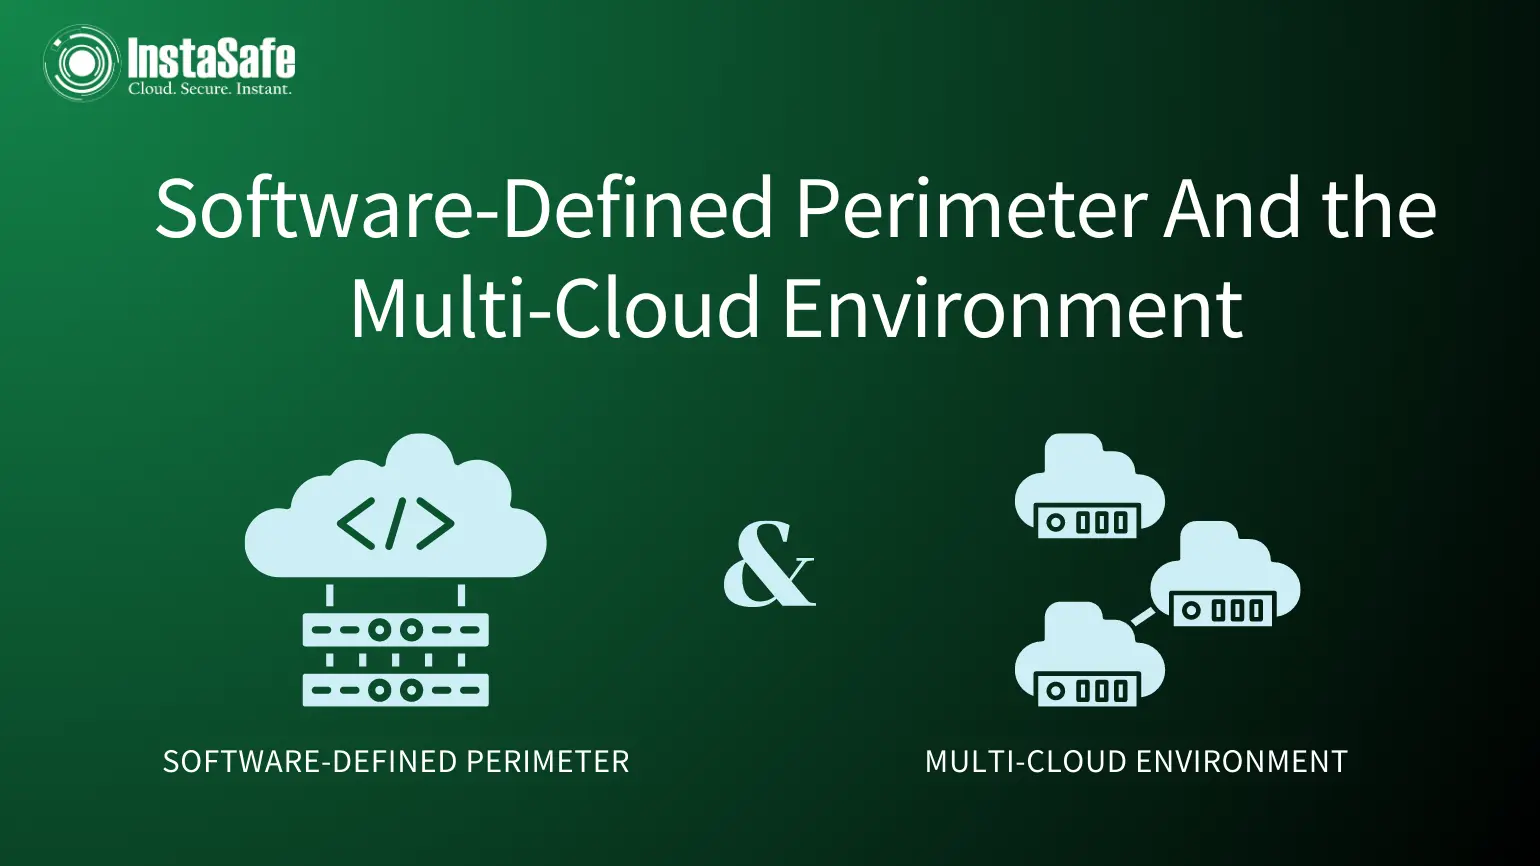 Software-Defined Perimeter And the Multi-Cloud Environment